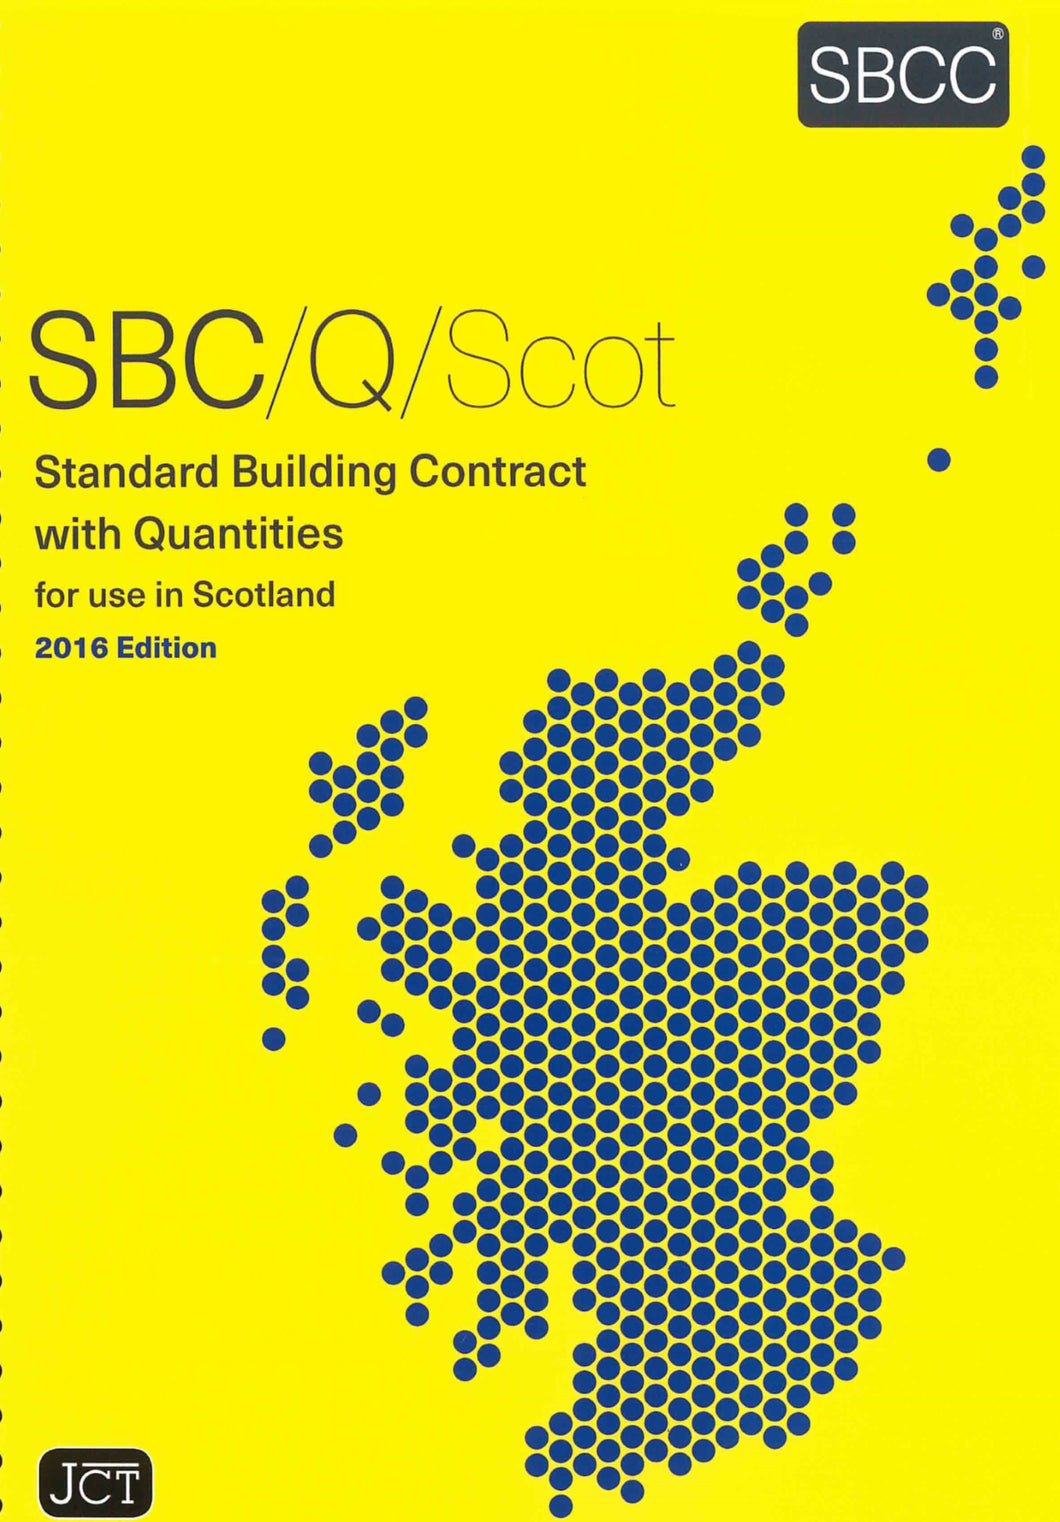 Standard Building Contract with Quantities for use in Scotland 2016